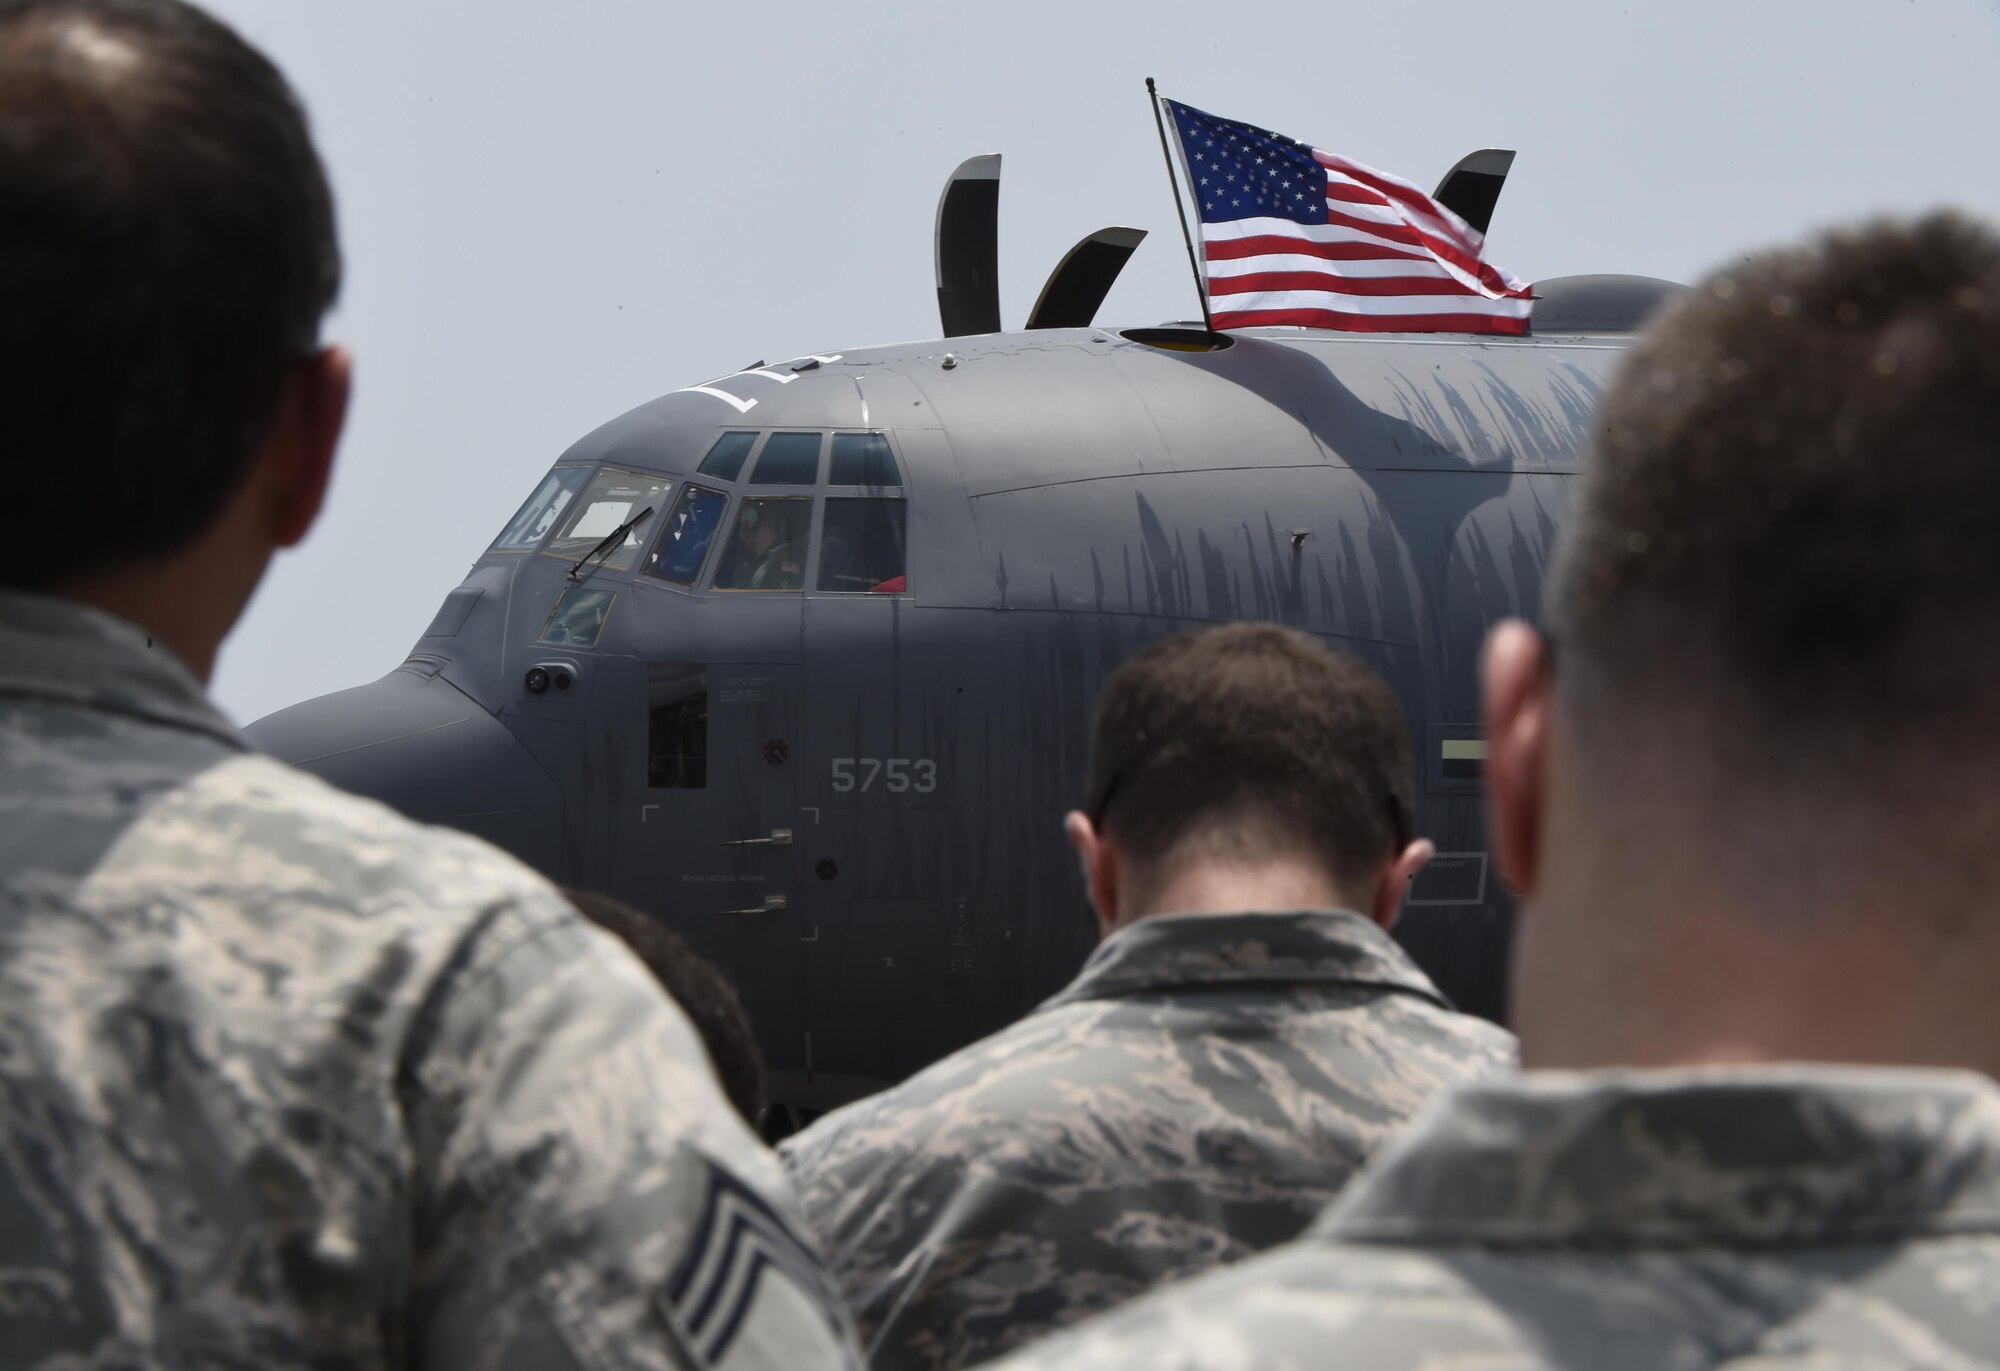 Hurlburt Airmen watch the arrival of the AC-130J Ghostrider at Hurlburt Field, Fla., July 29, 2015. The 1st Special Operations Wing accepted delivery of Air Force Special Operations Command’s first AC-130J that will be flown by the 1st Special Operations Group Detachment 2 and maintained by the 1st Special Operations Aircraft Maintenance Squadron. (U.S. Air Force photo by Airman Kai White/Released)